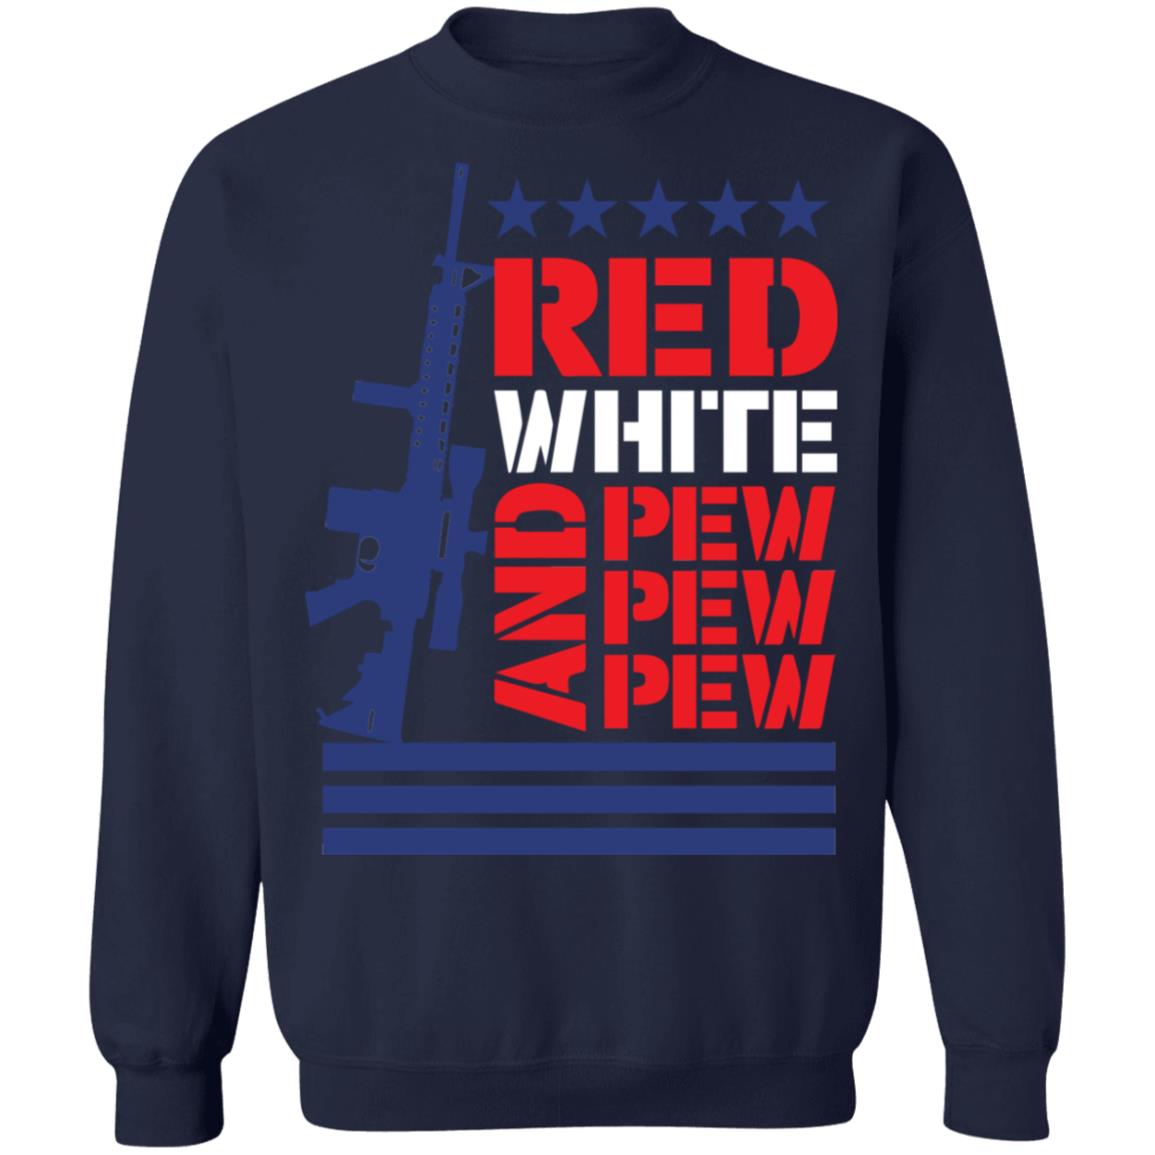 red white and pew shirt